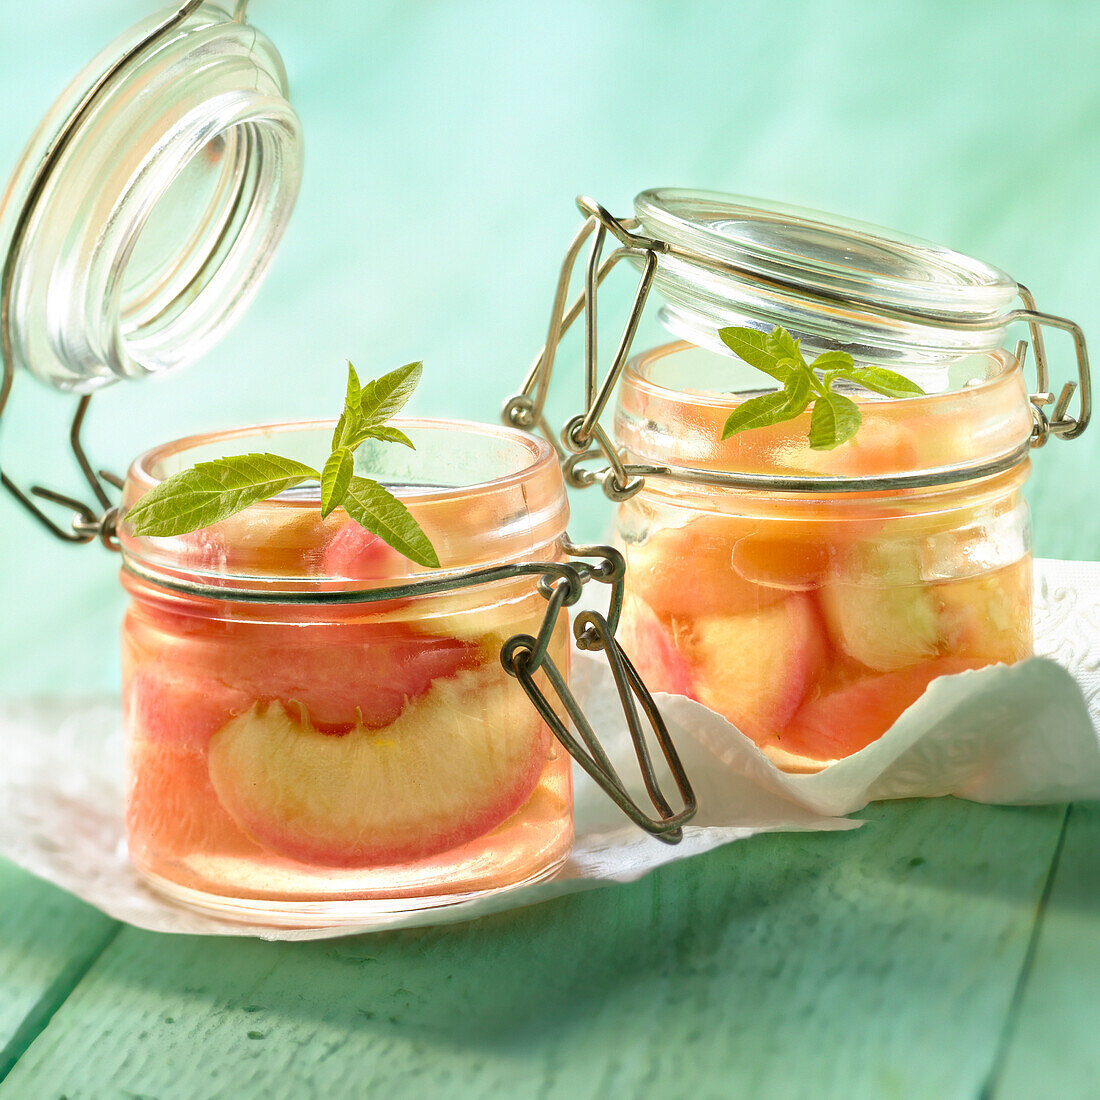 Steam-cooked peaches in verbana syrup